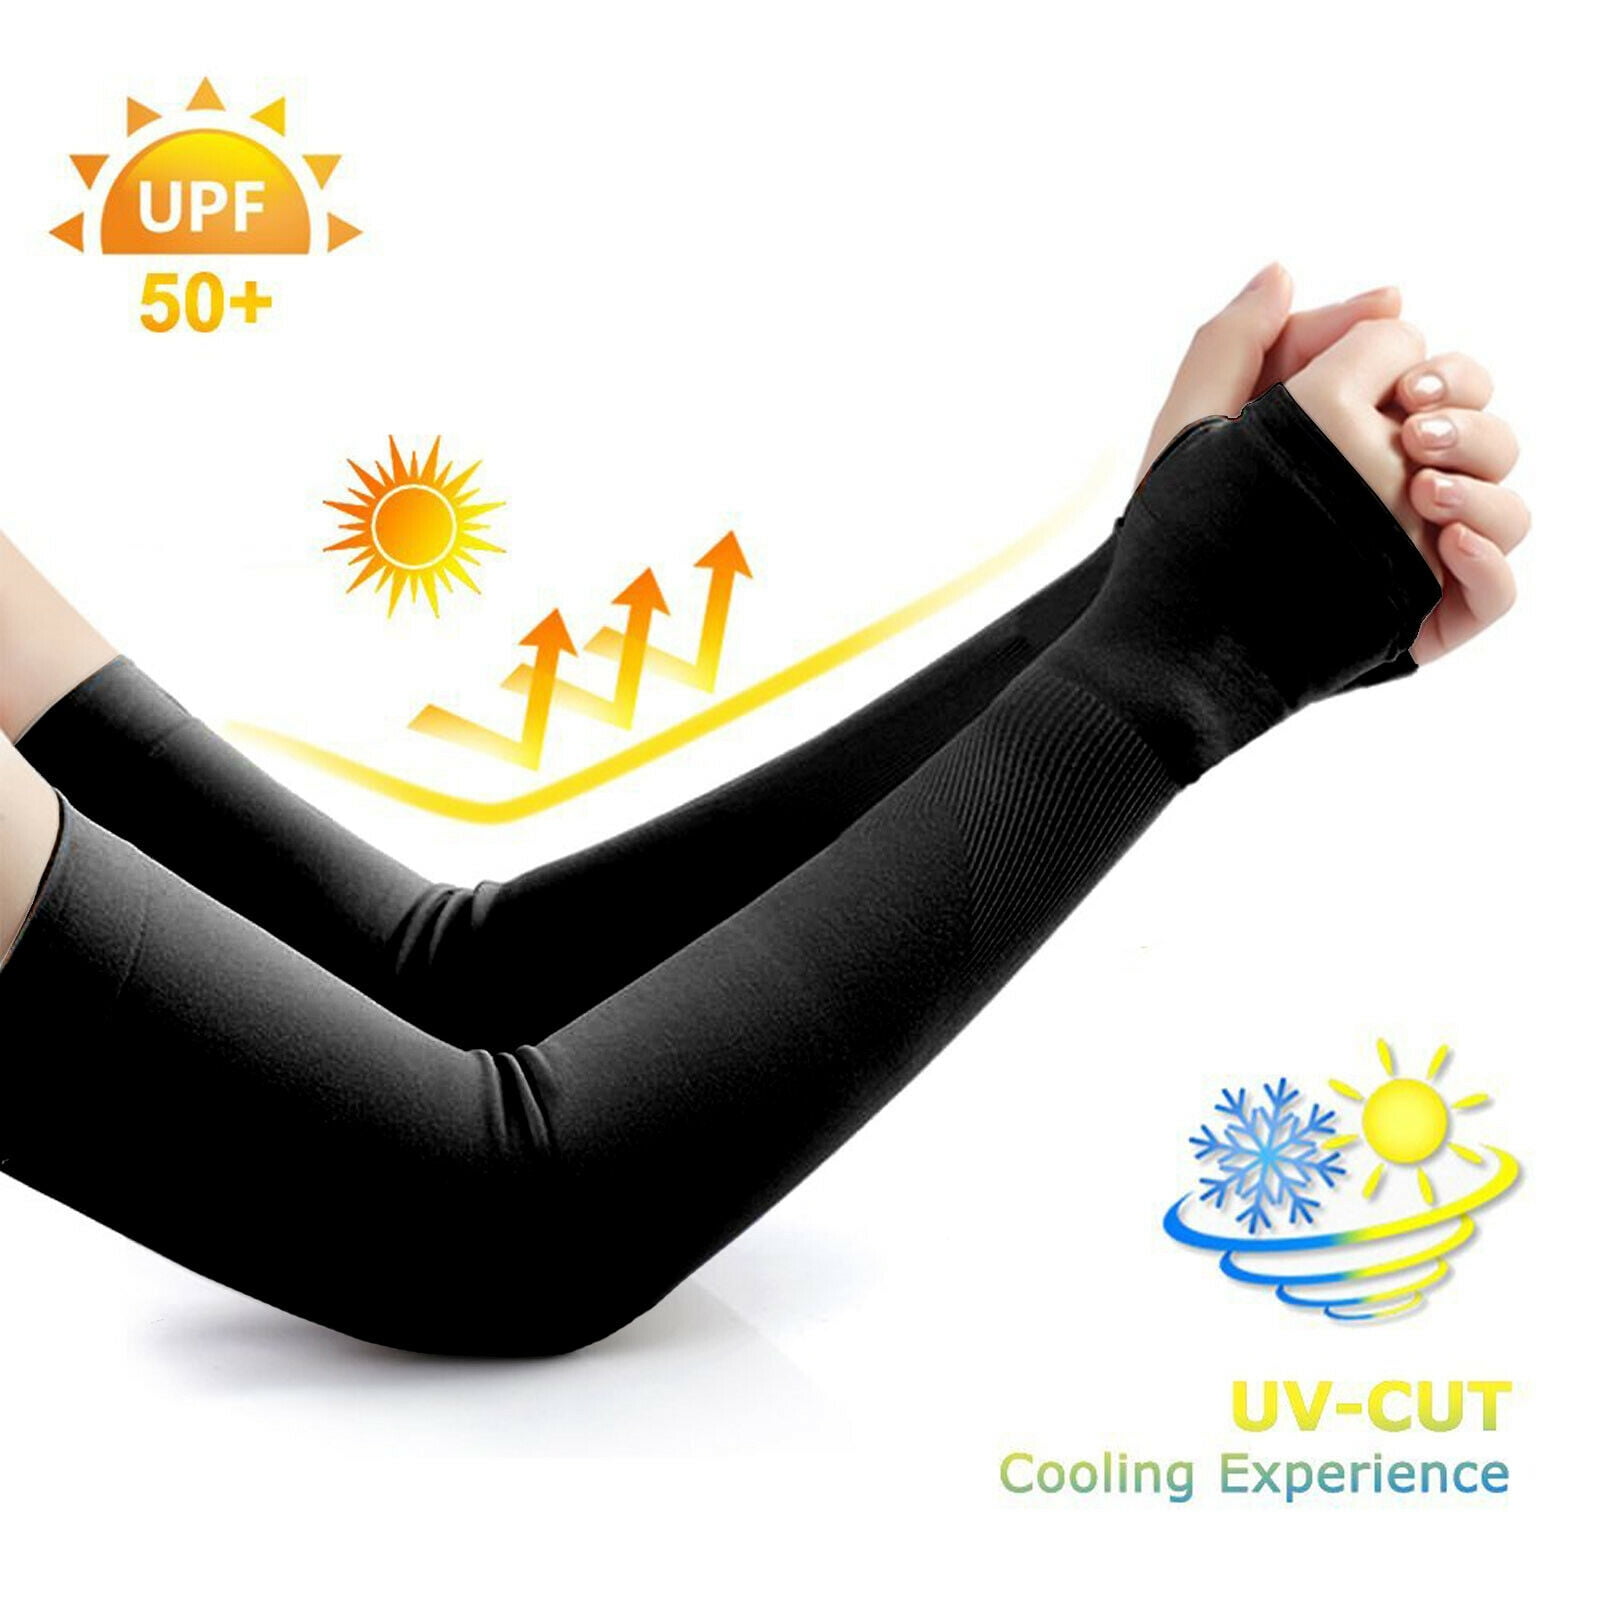 1 Pair Cooling Arm Sleeves UV Protective Absorbent Arm Cover for Outdoor I2U0 